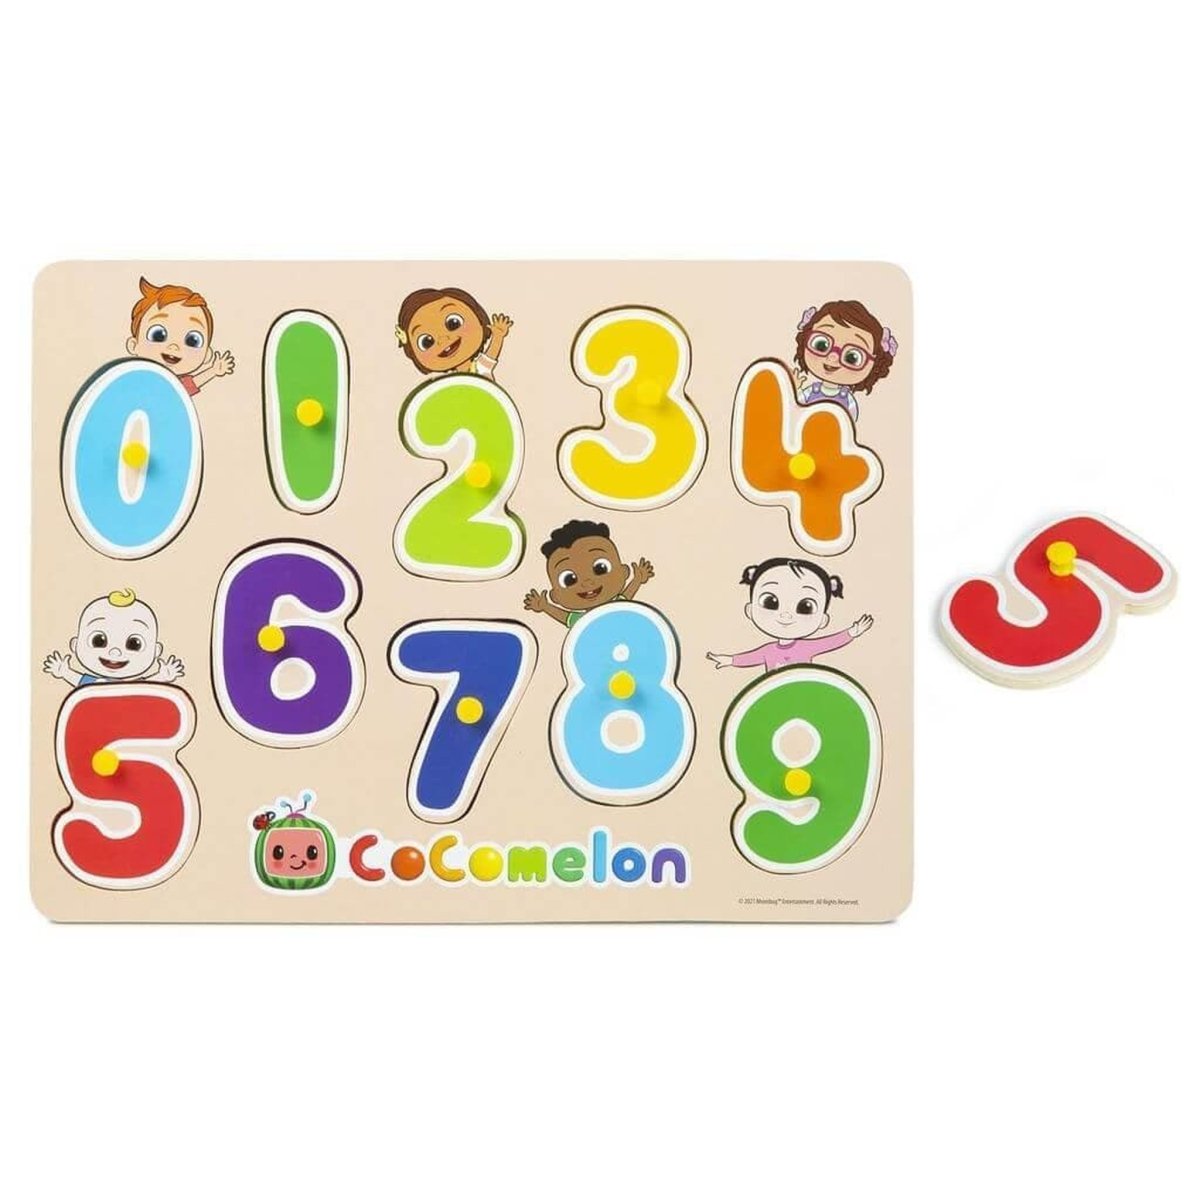 Cocomelon Wooden Numbers Peg Board - Kids Party Craft